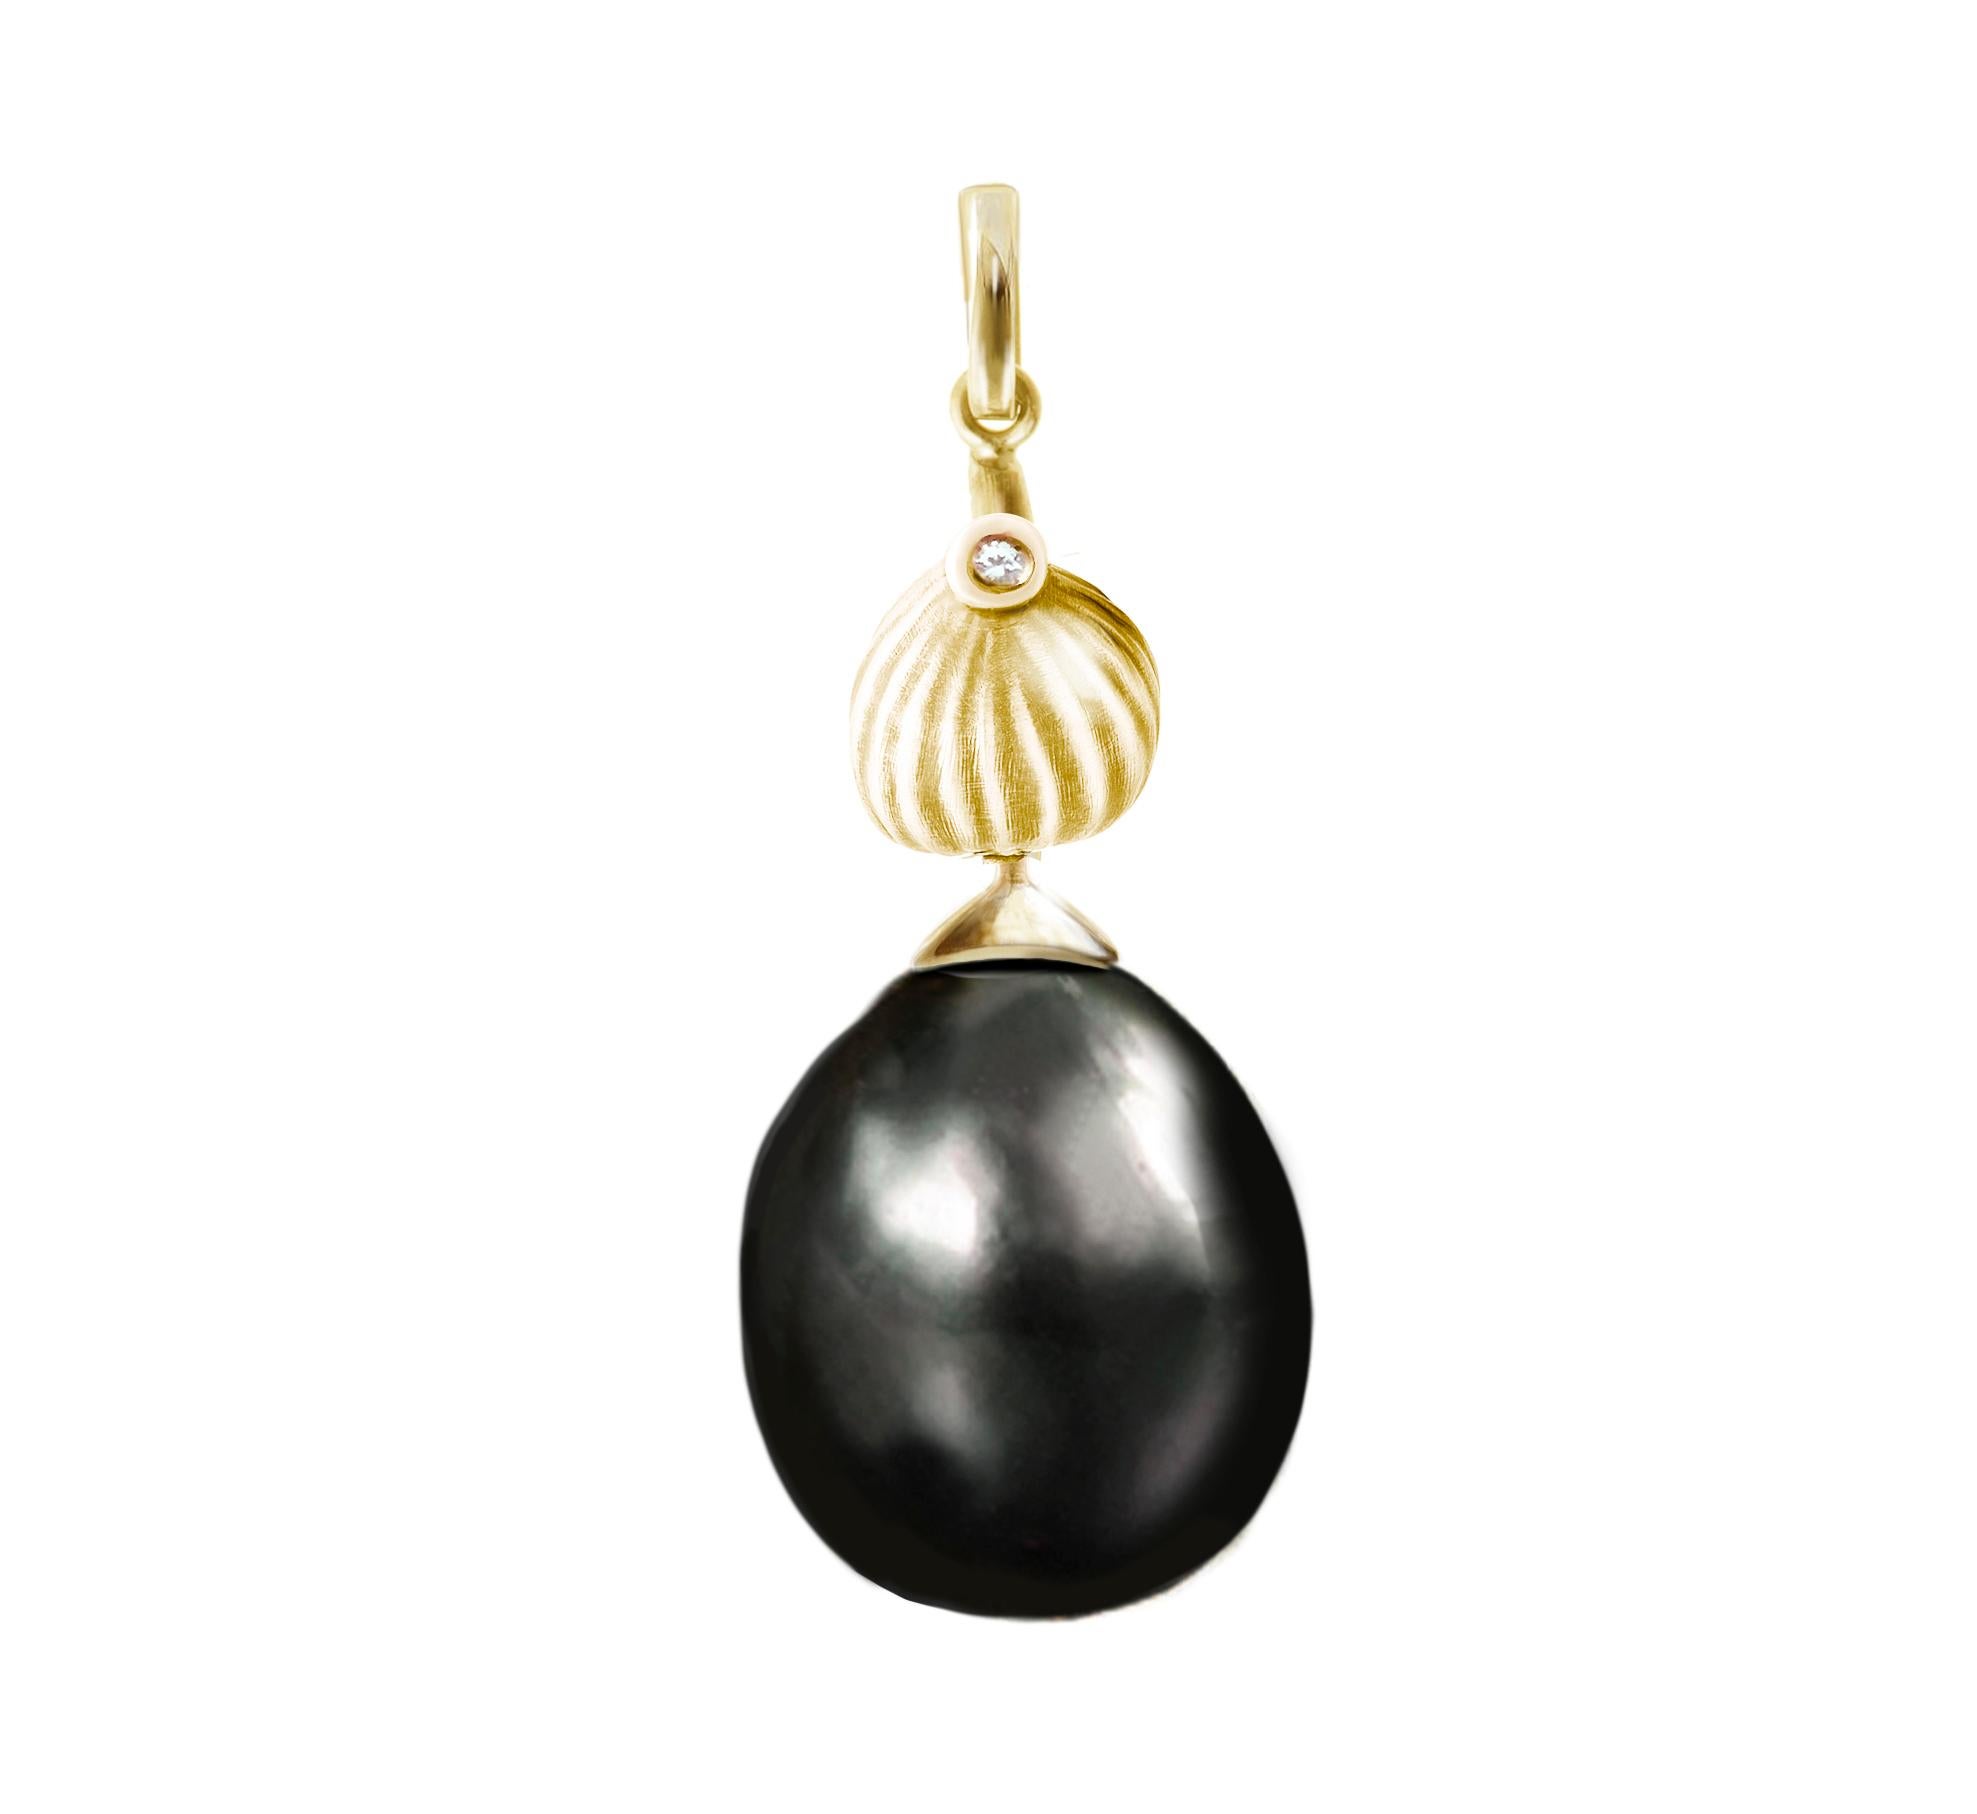 This stunning pendant necklace from the Fig collection features black Tahiti pearl (cultured) and a natural round diamond, set in 18-karat yellow gold. The Fig collection was featured in Vogue UA review and was designed by the Berlin-based oil